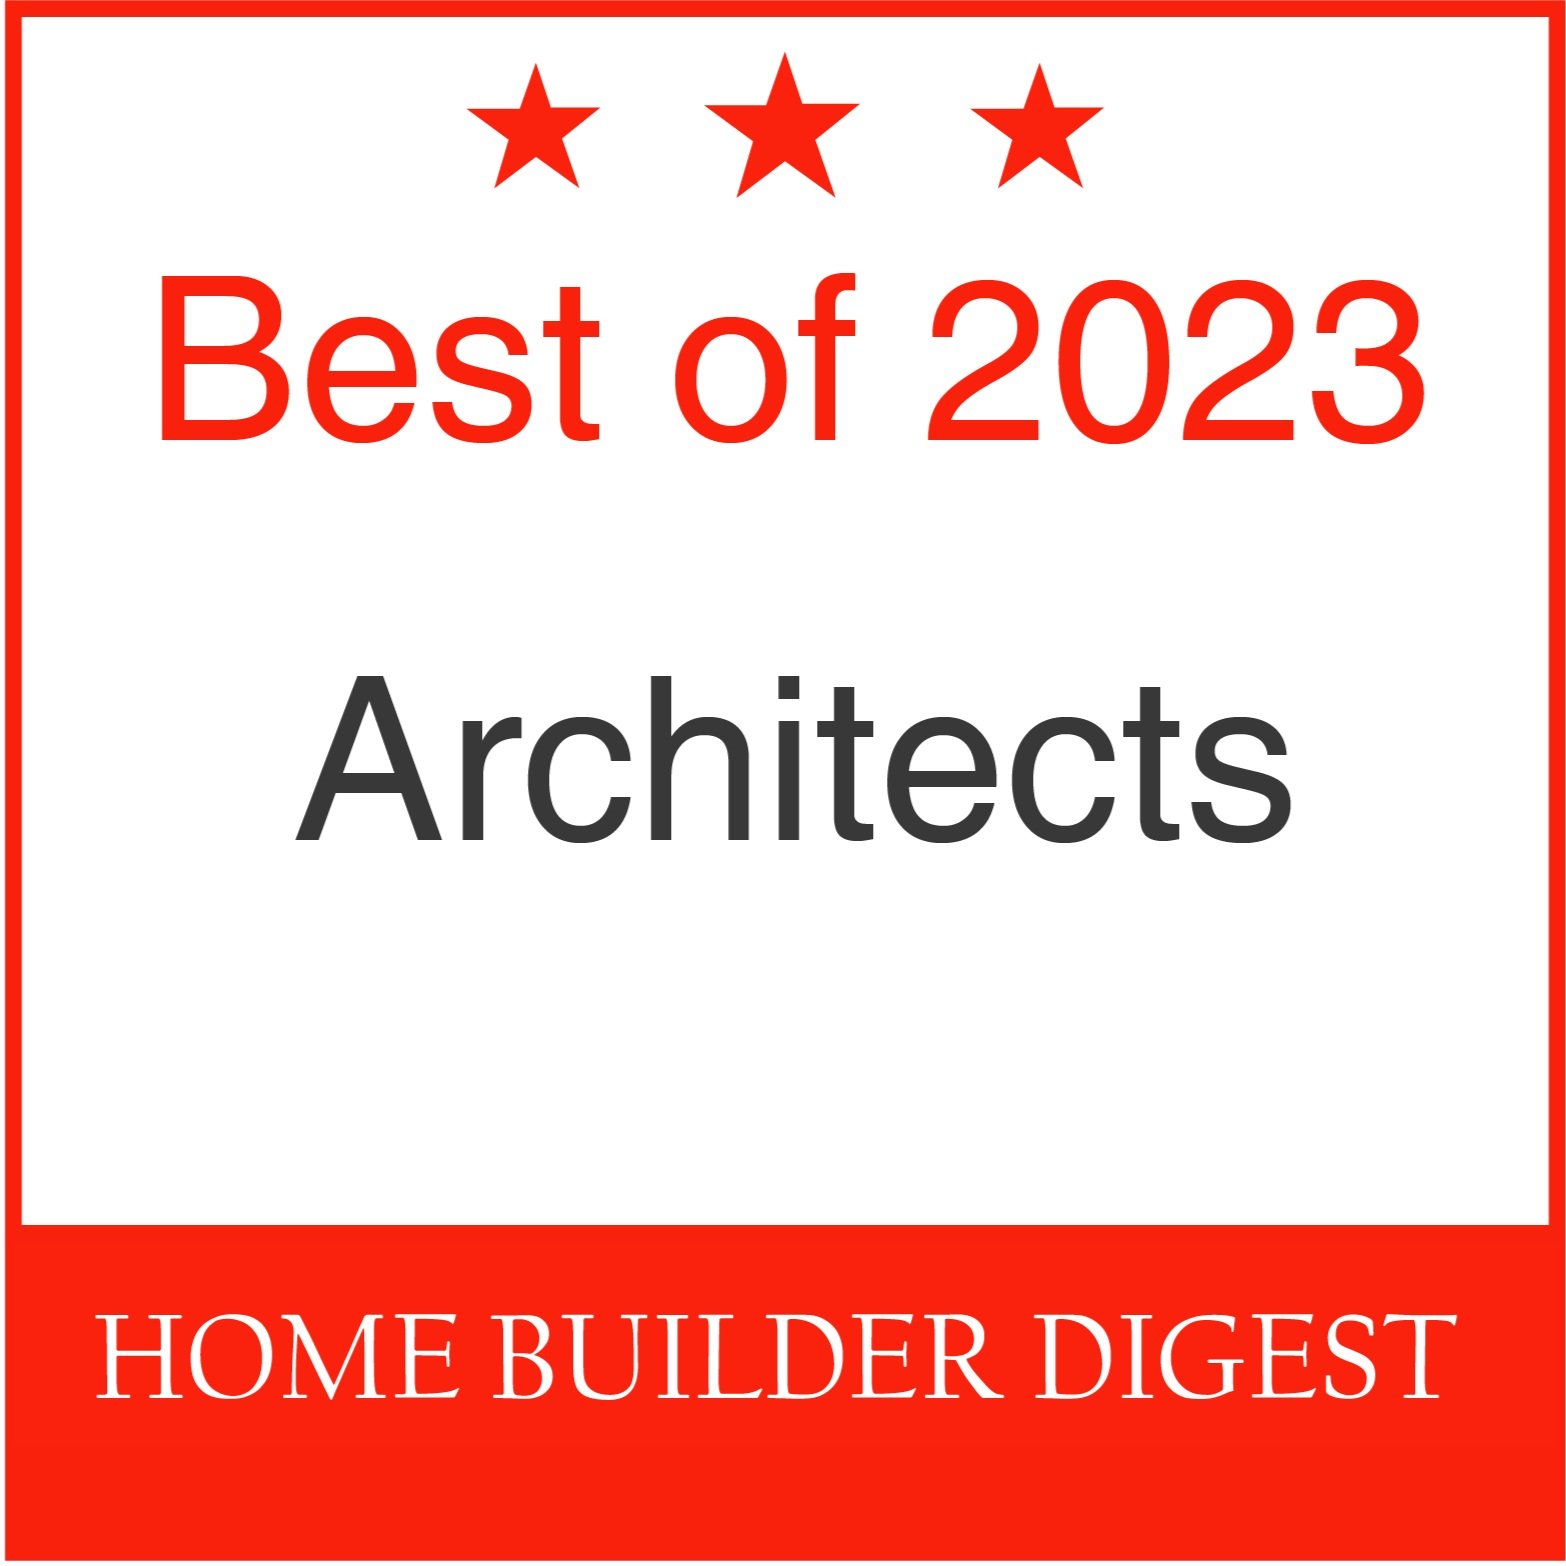 BEST OF 2023 Architects